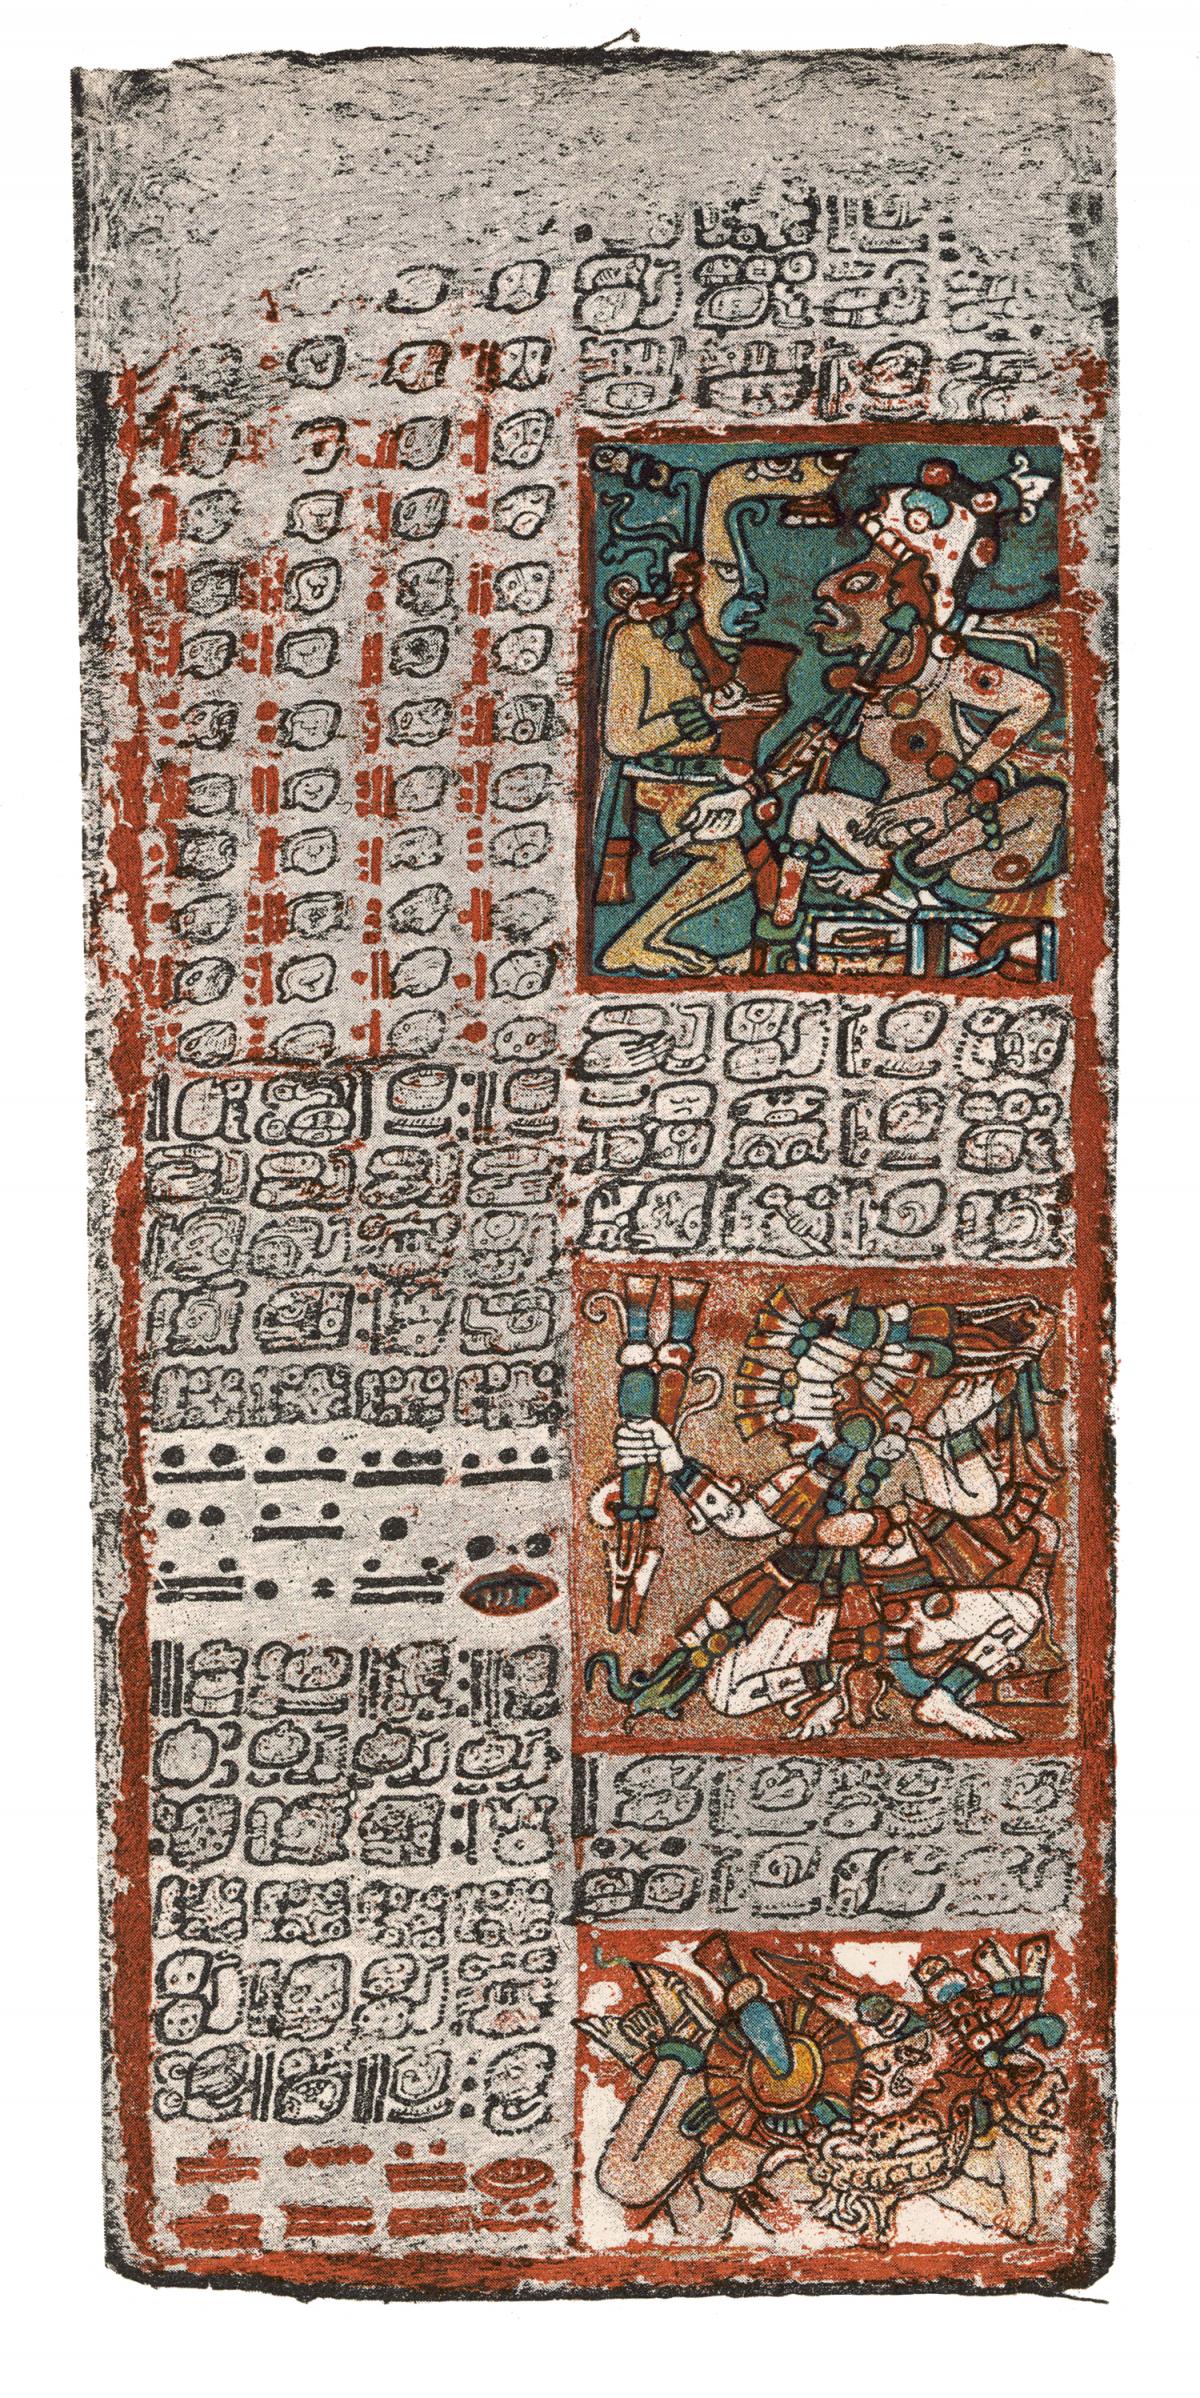 Another section of the Dresden Codex, depicting gods and demons